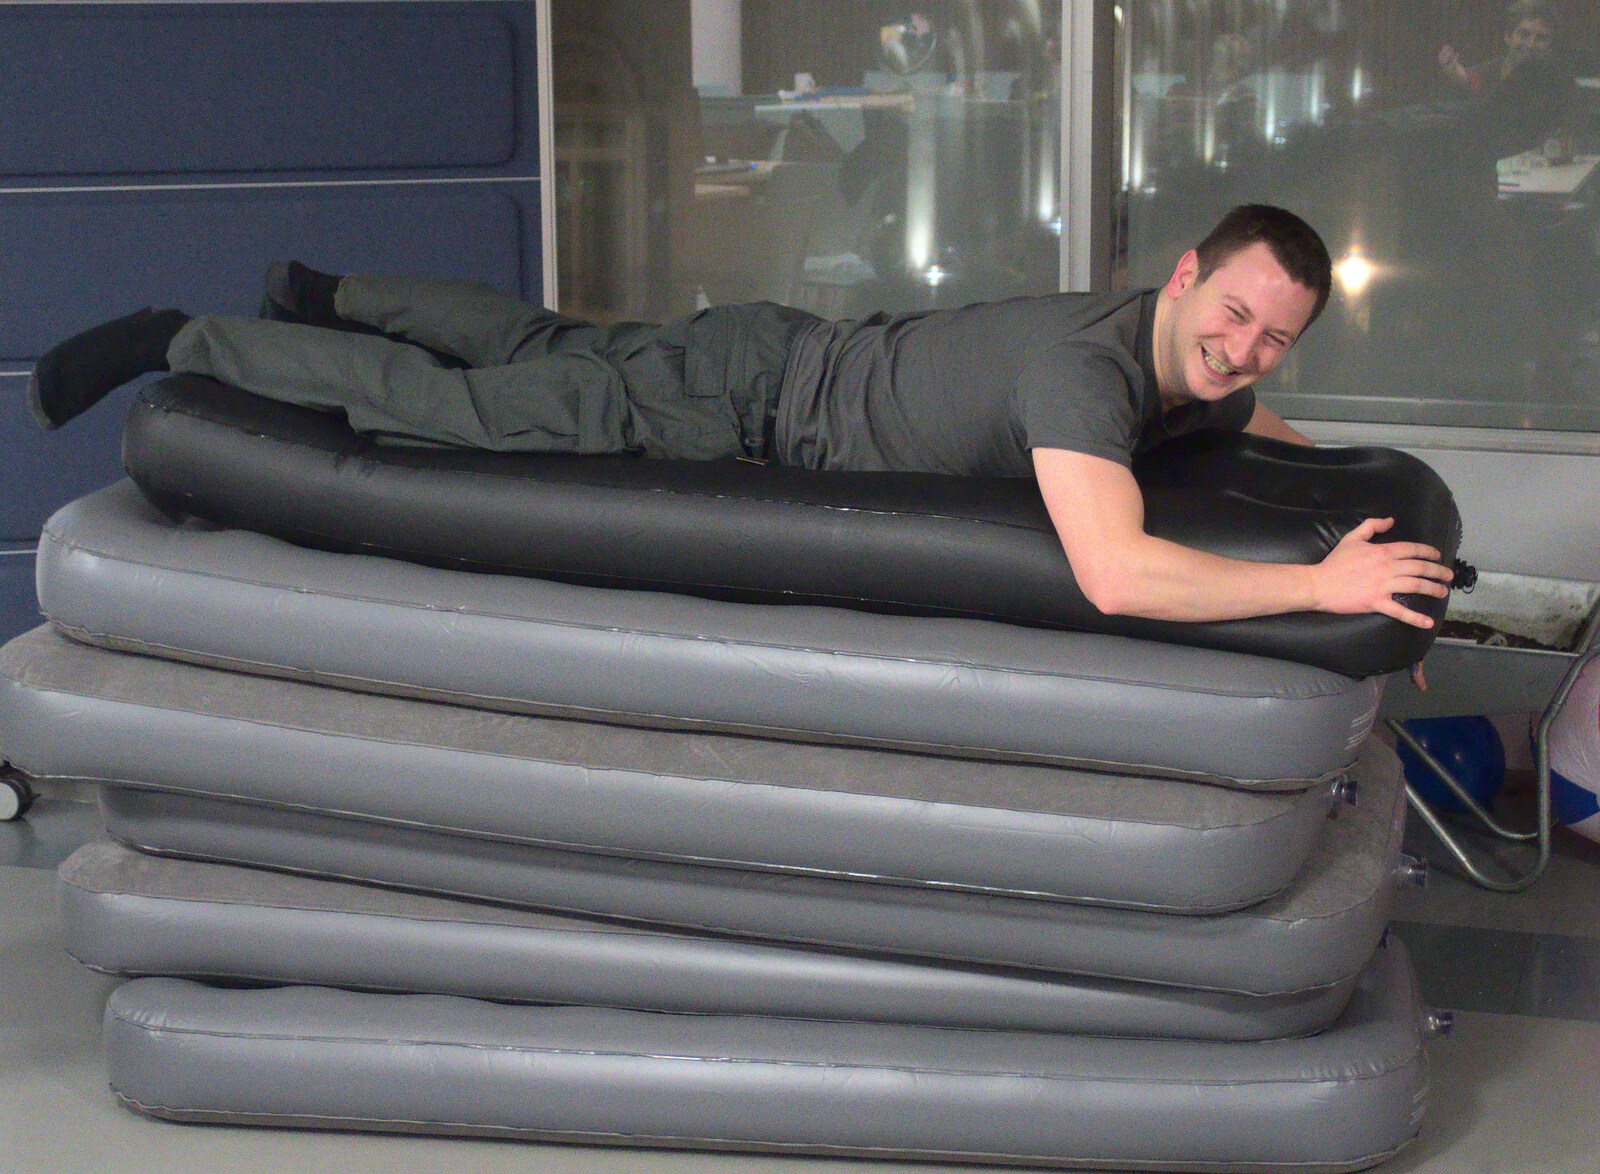 Joe piles on to a heap of air beds from SwiftKey Innovation Nights, Westminster, London - 19th December 2014